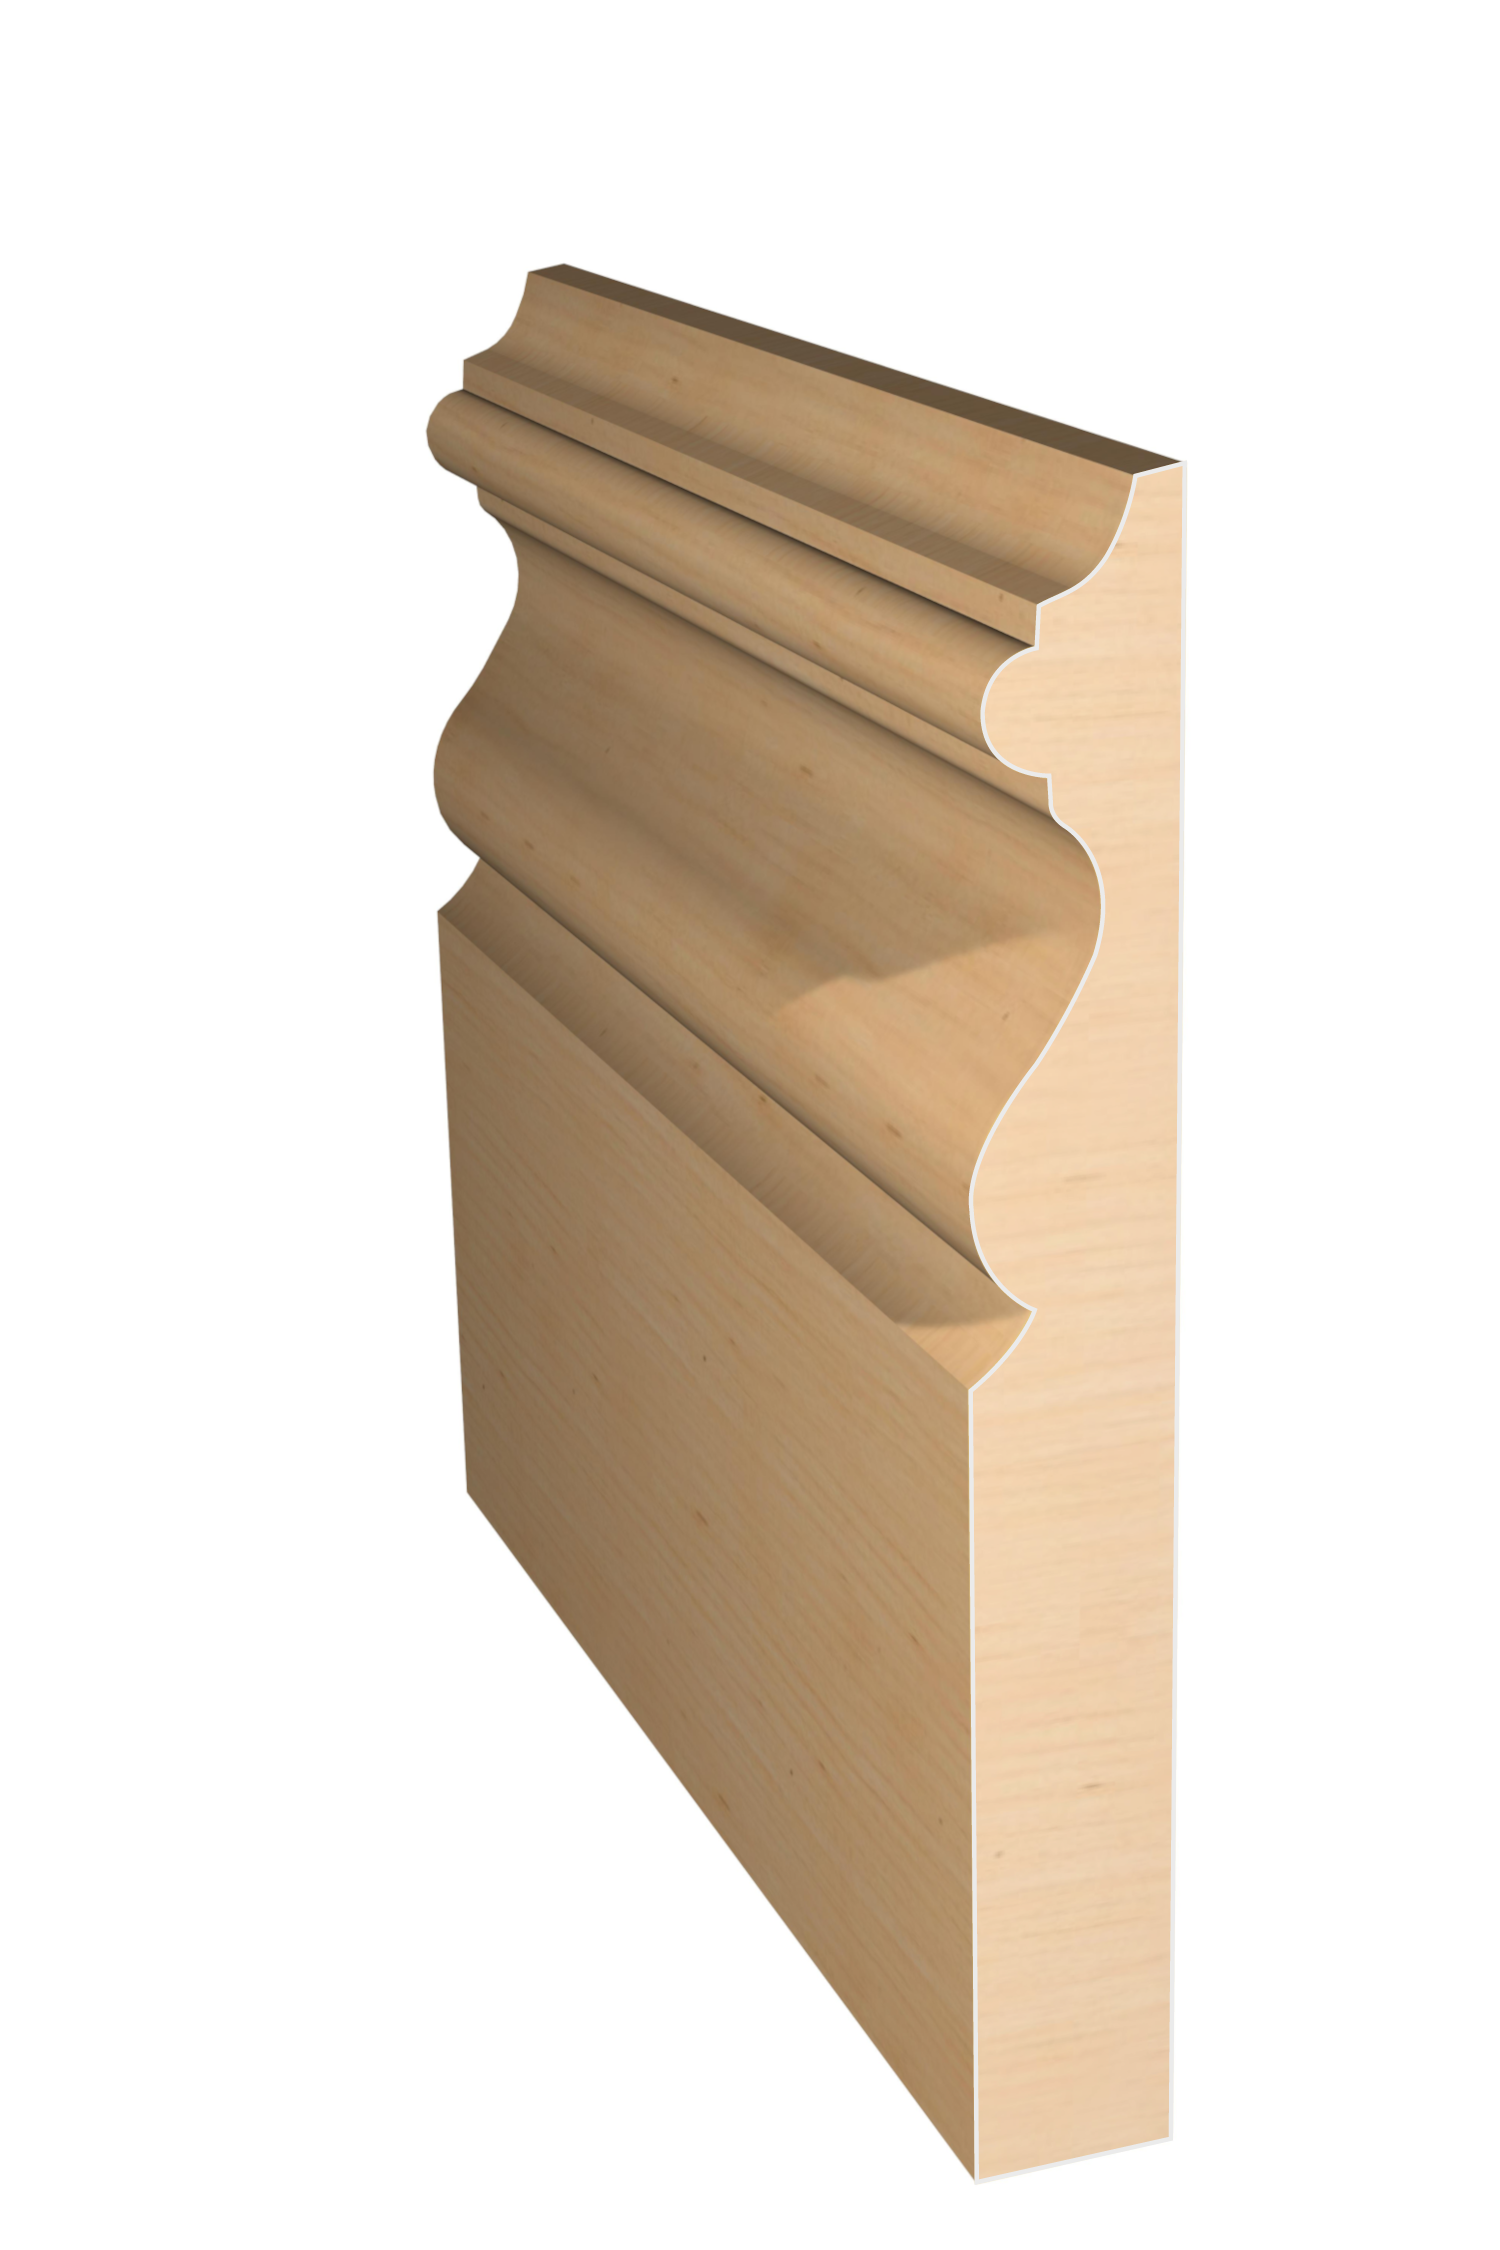 Three dimensional rendering of custom base wood molding BAPL51212 made by Public Lumber Company in Detroit.